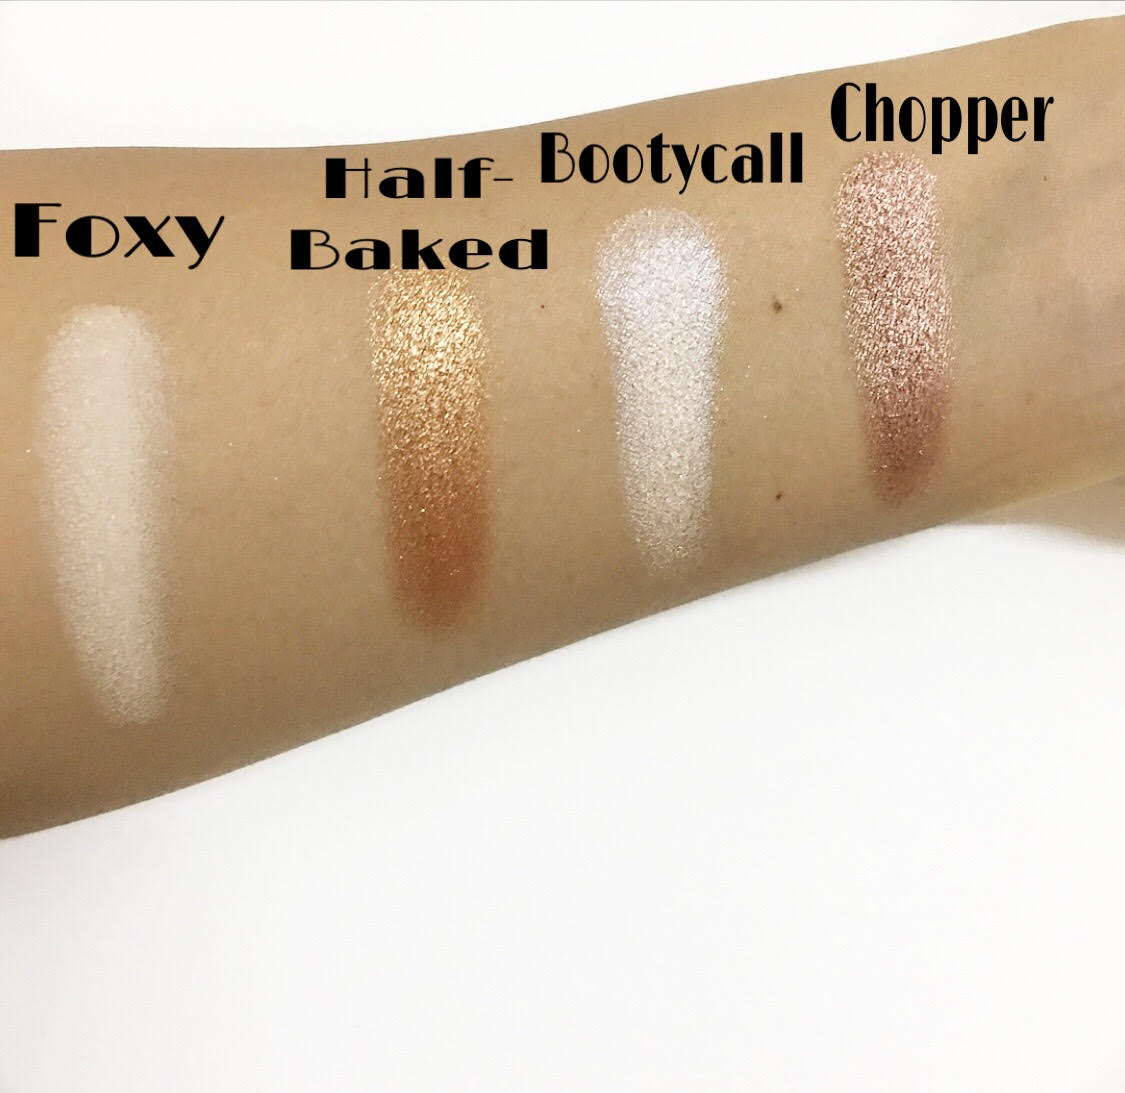 Urban Decay Naked Palette Comparison Review